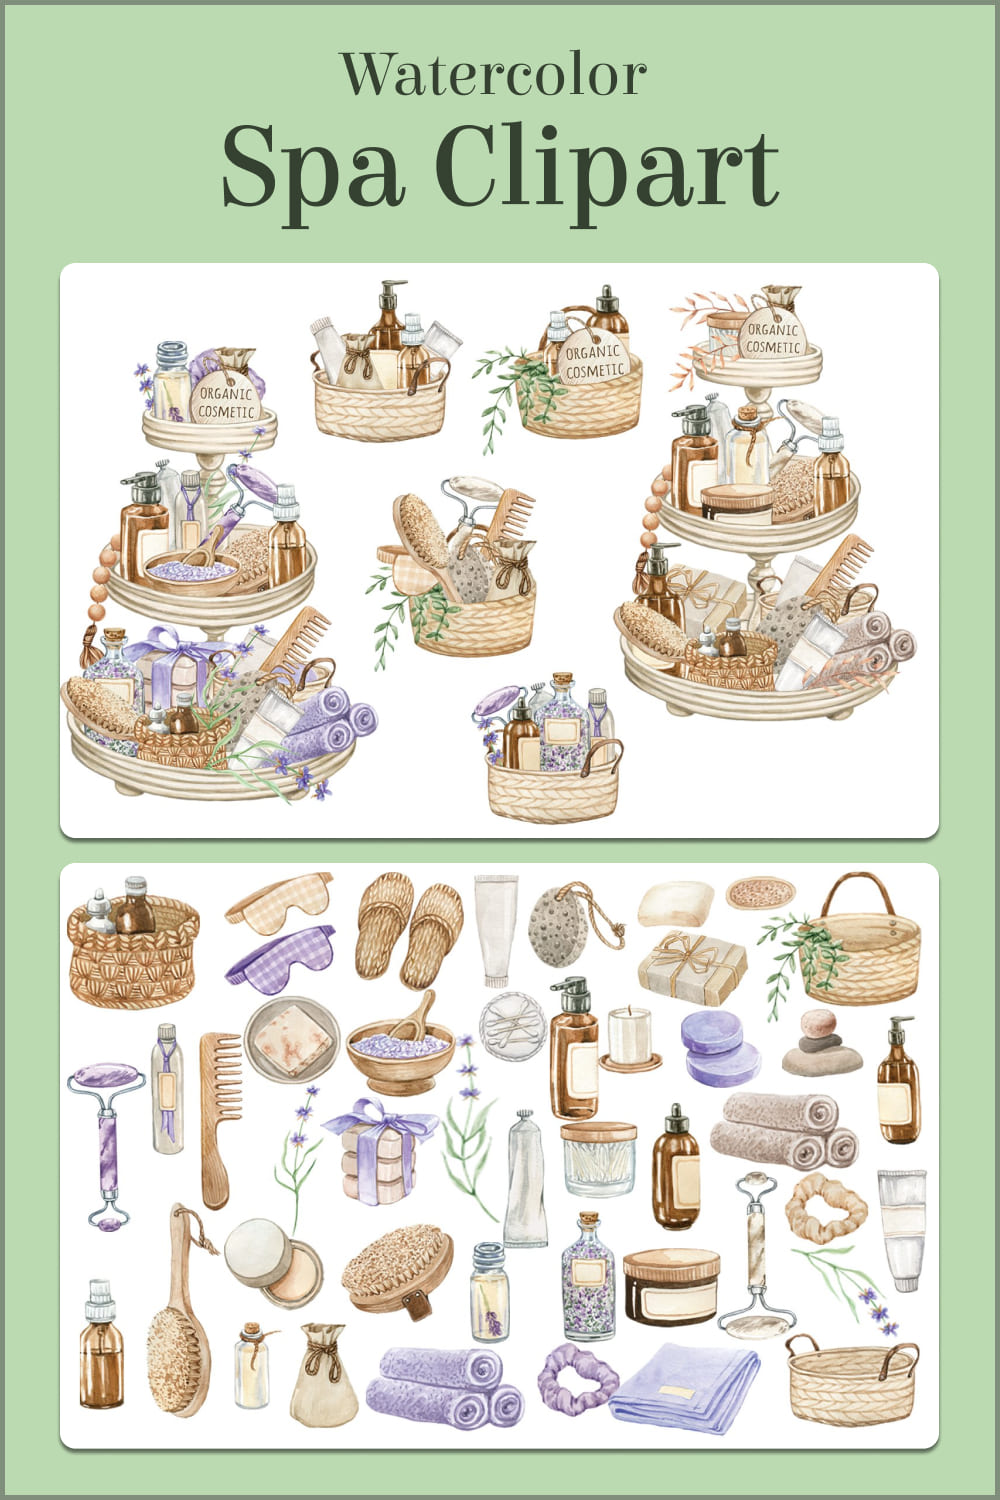 Watercolor spa clipart - pinterest image preview.